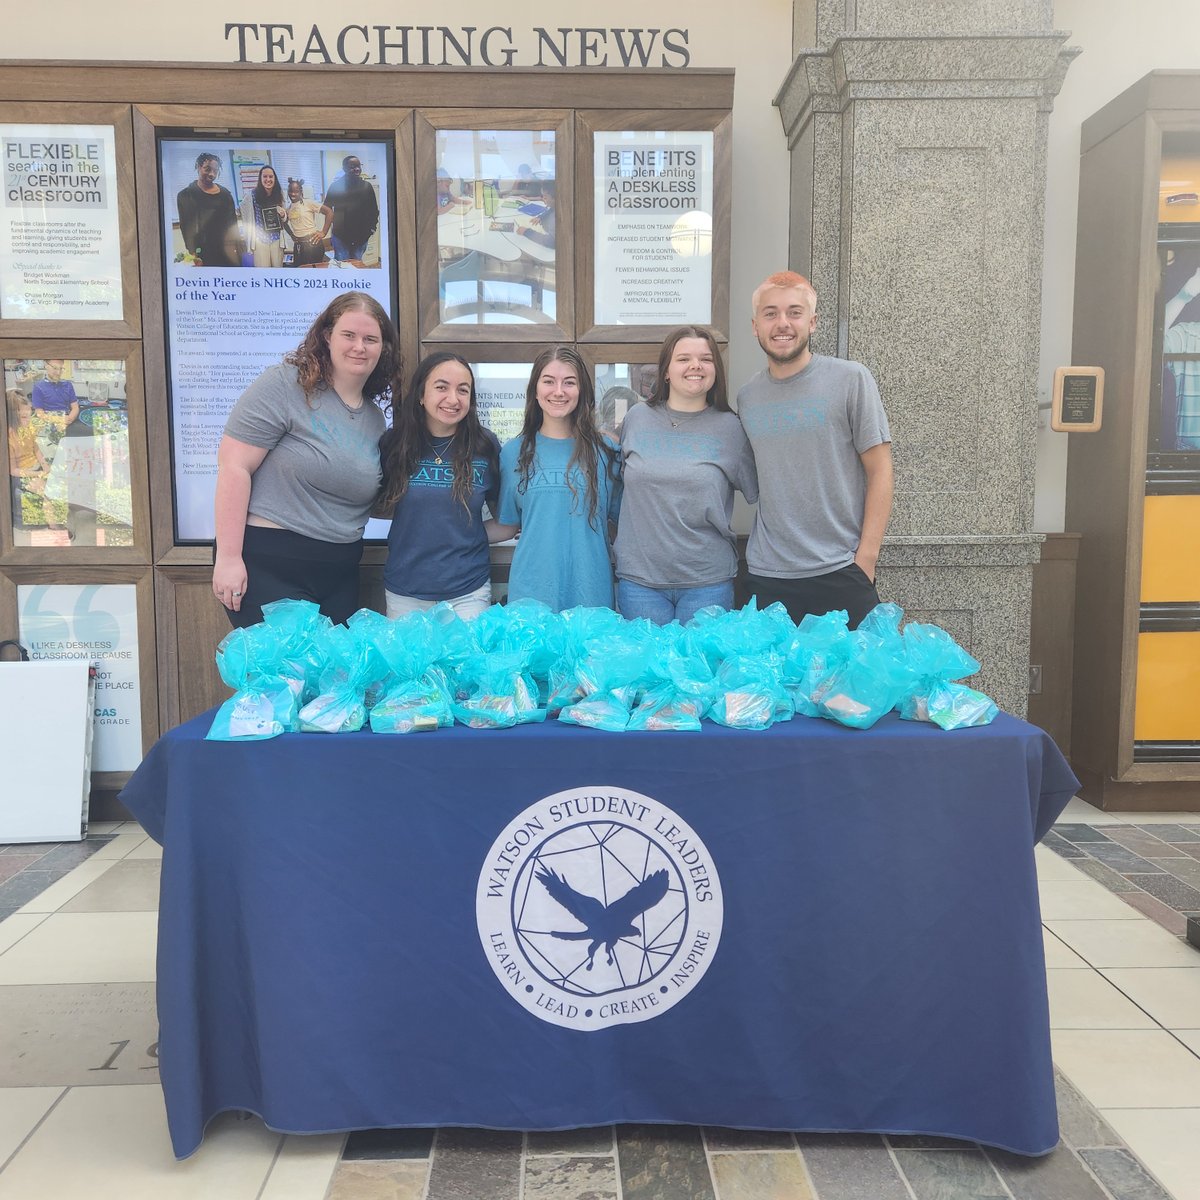 Happy #WatsonWednesdays! Come visit the @uncwwatsonstudentleaders in the Ed Building for some free treats and words of encouragement for your exams! #ItBeginsWithTeachers #WSL #WSLcares